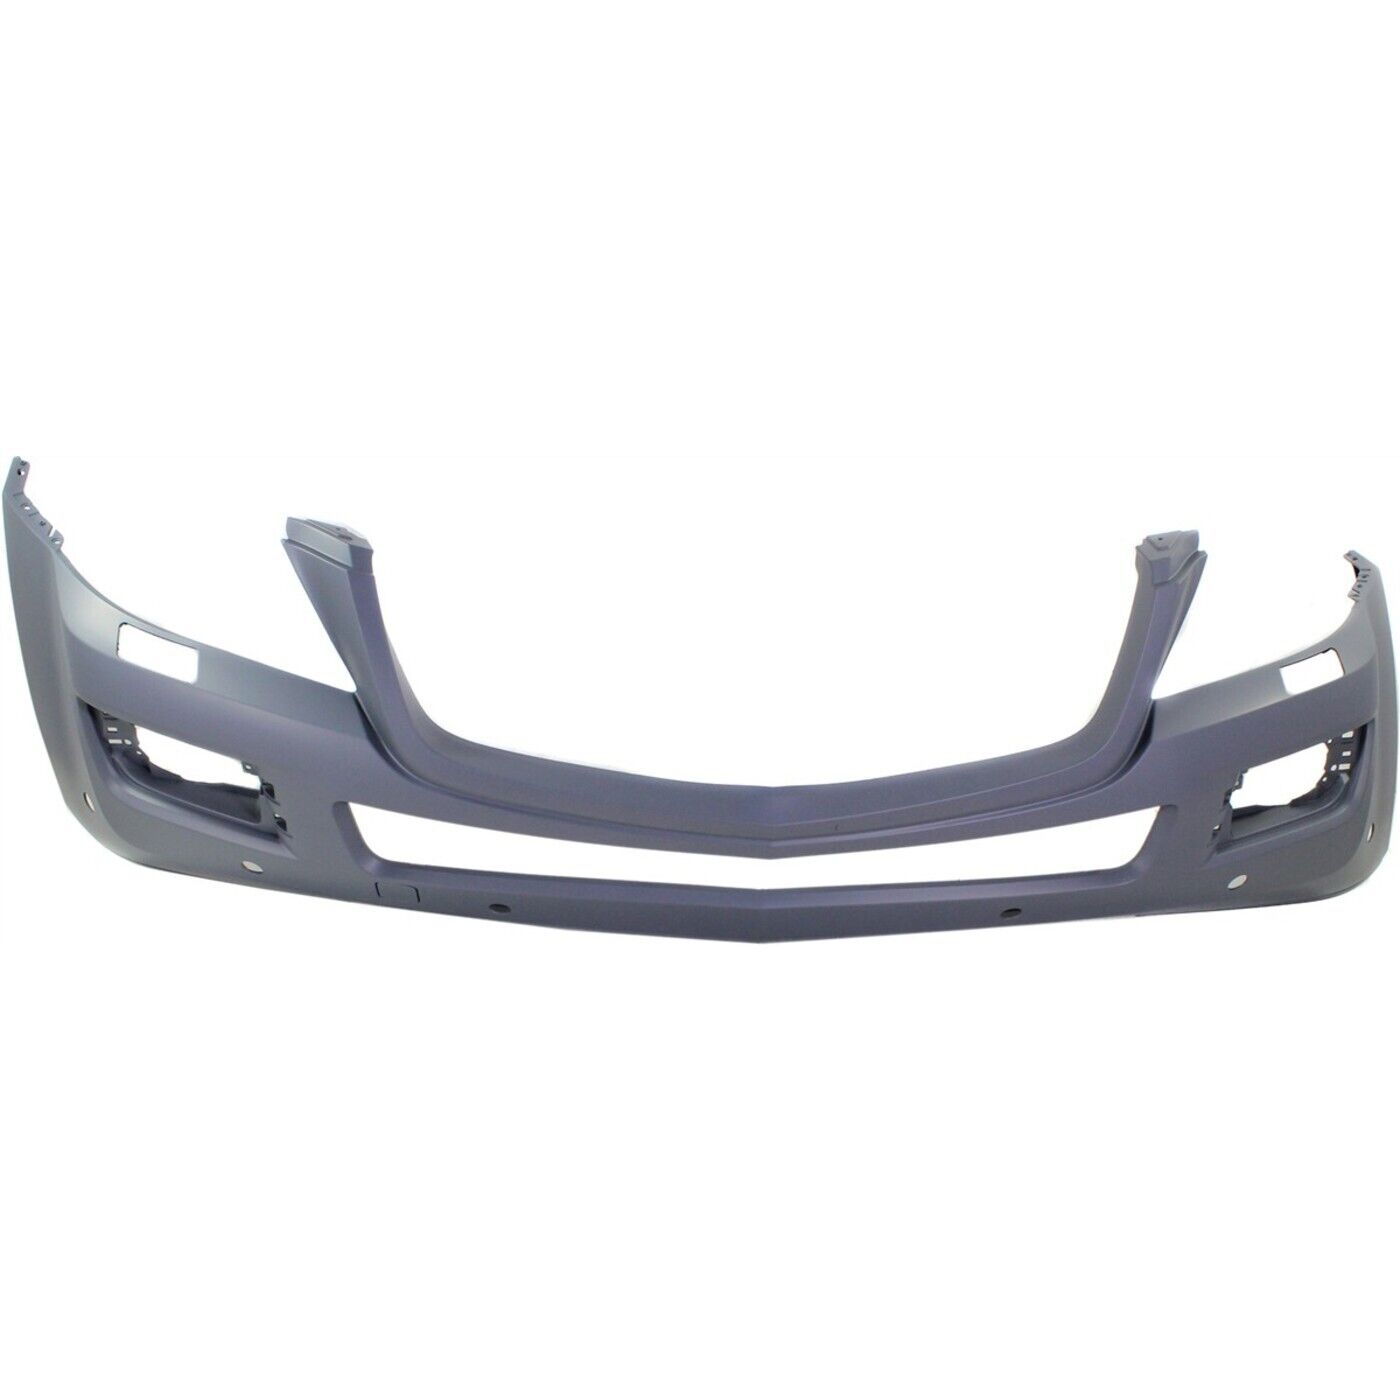 Front Bumper Cover For 2007-09 Mercedes Benz GL450 w/ Curve Lgt./HLW/Parktronic